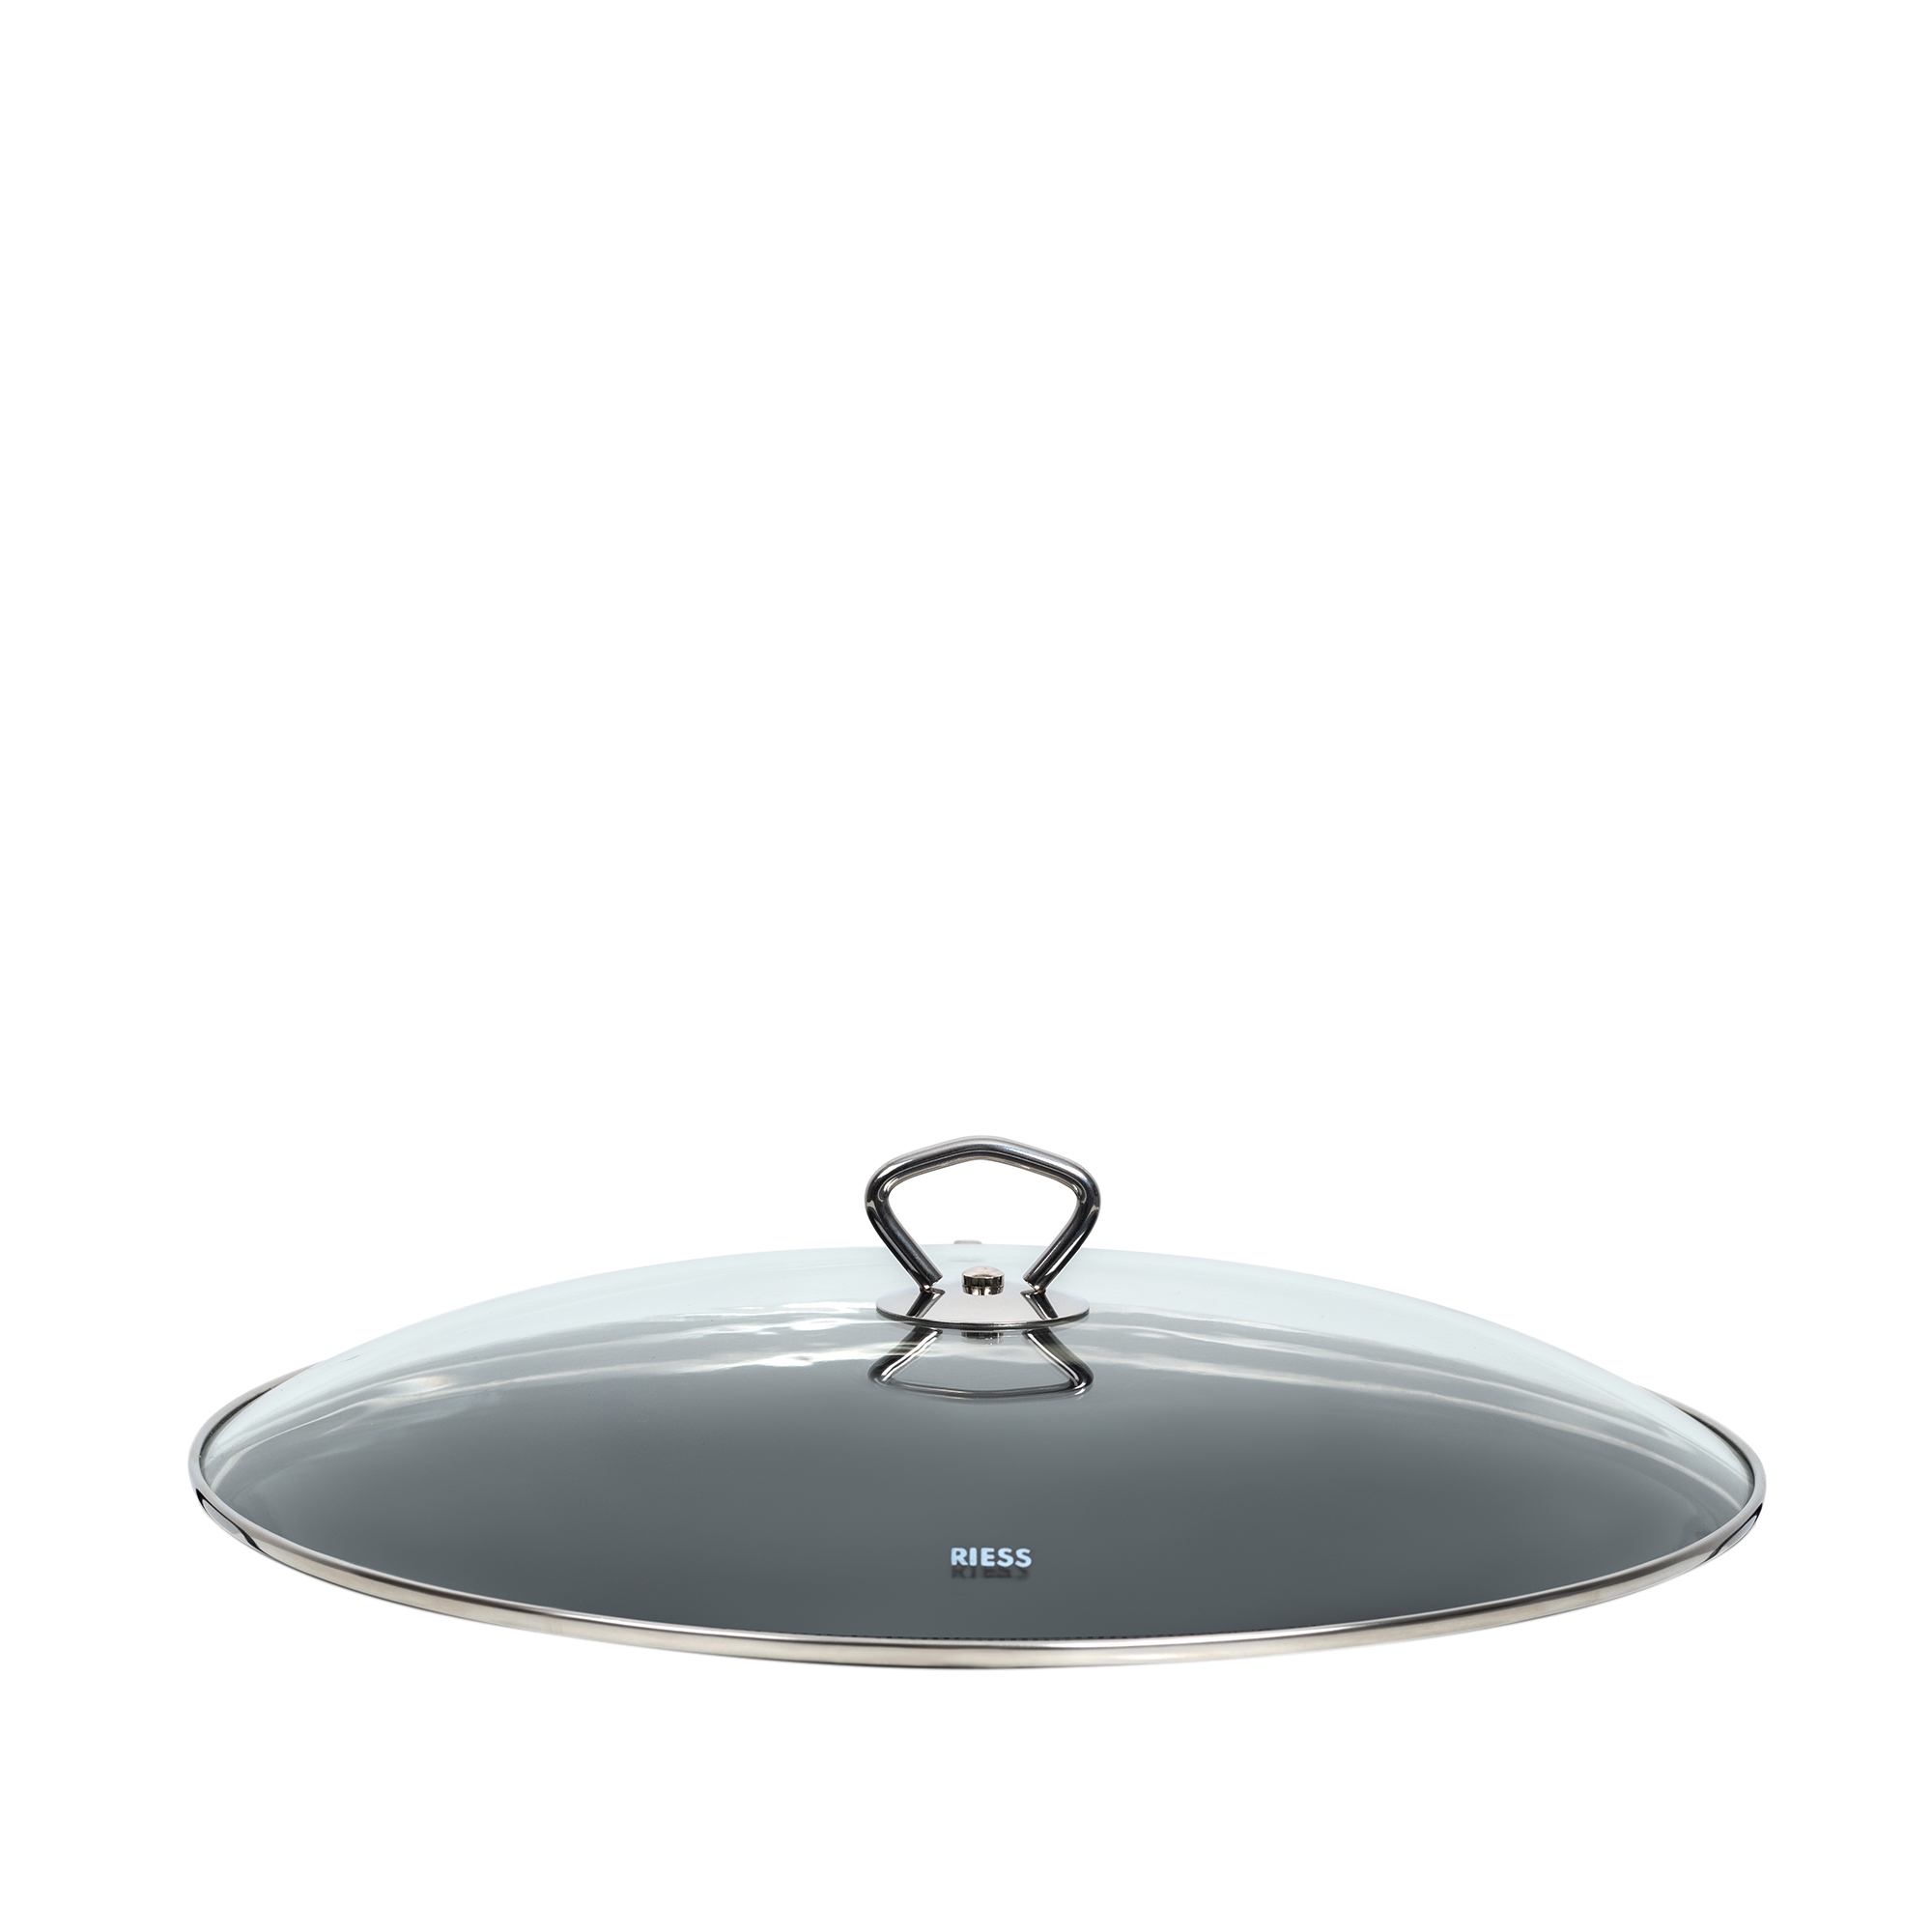 Riess CLASSIC - spare part - glass lid for wok 0385-022